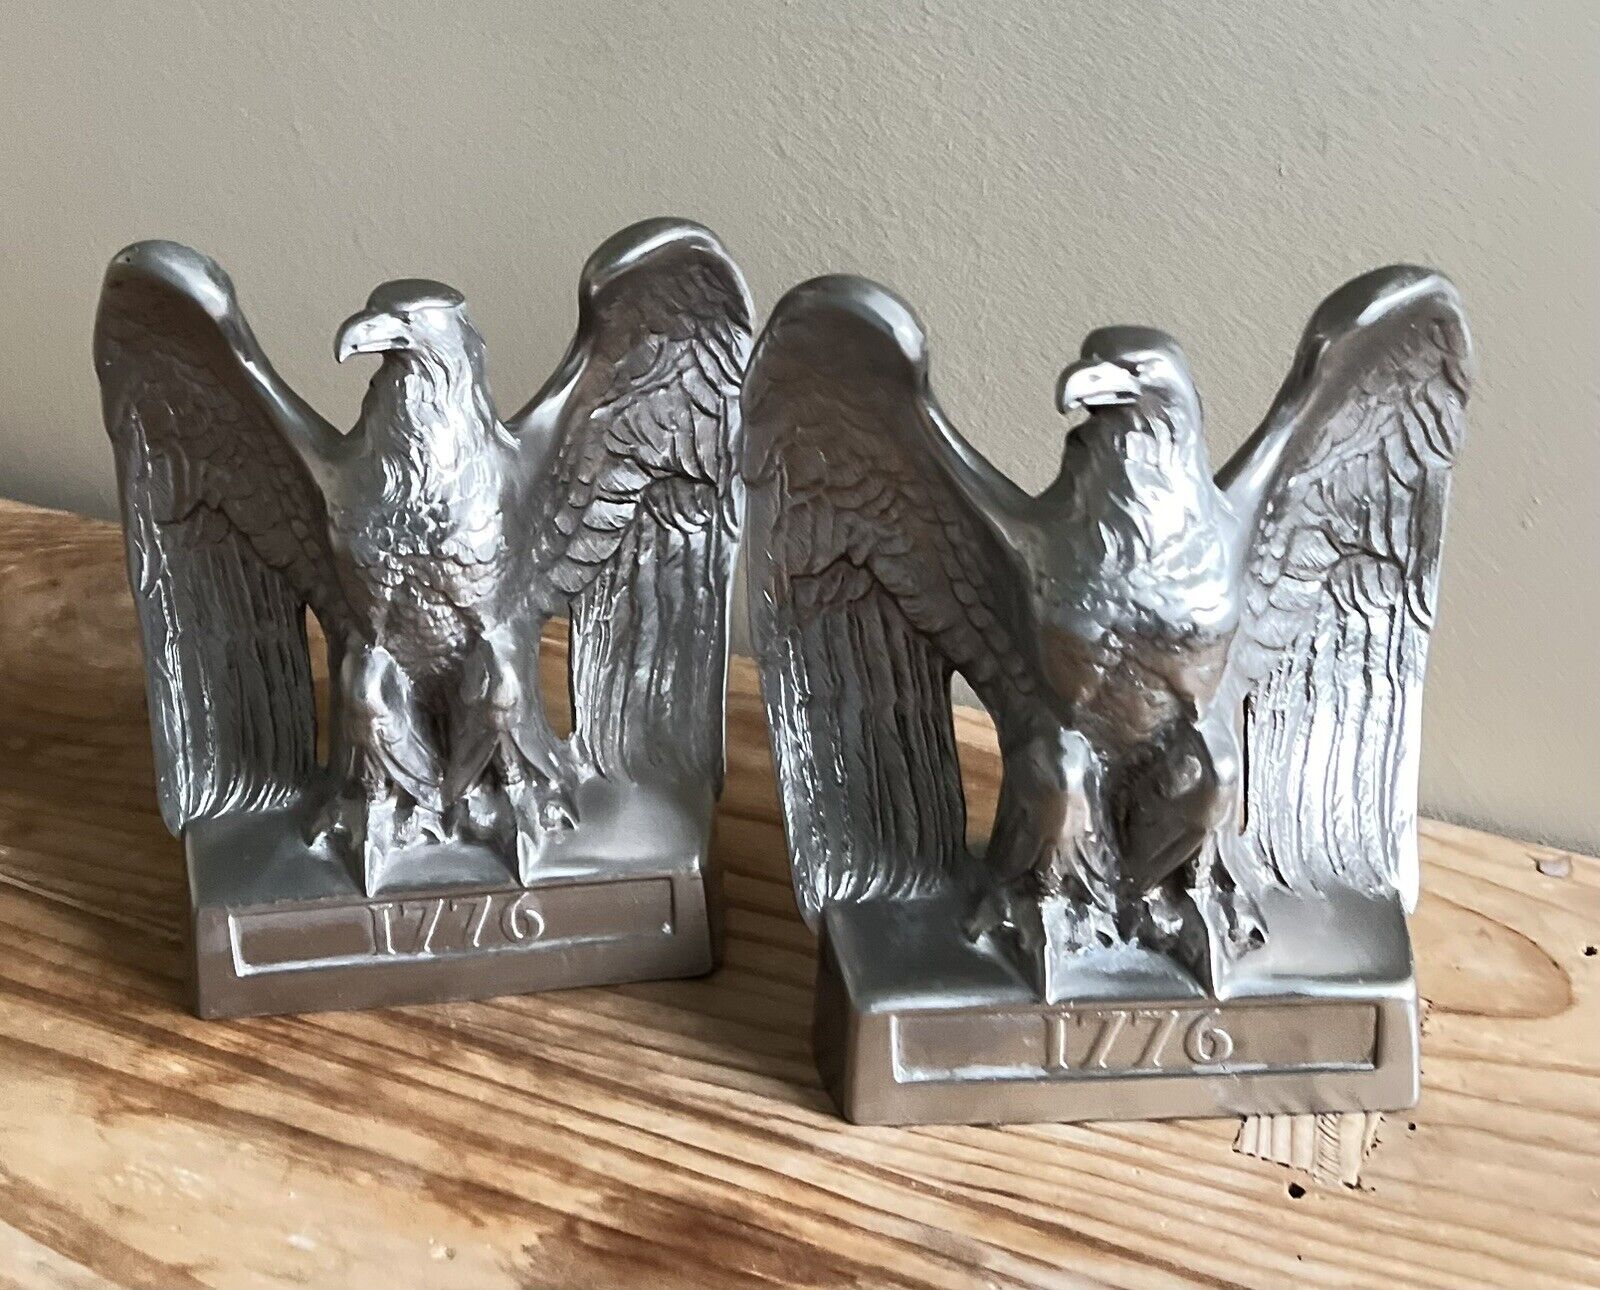 Bald Eagle Bookends 1776 Colonial Philadelphia Manufacturing Co Vintage Silver